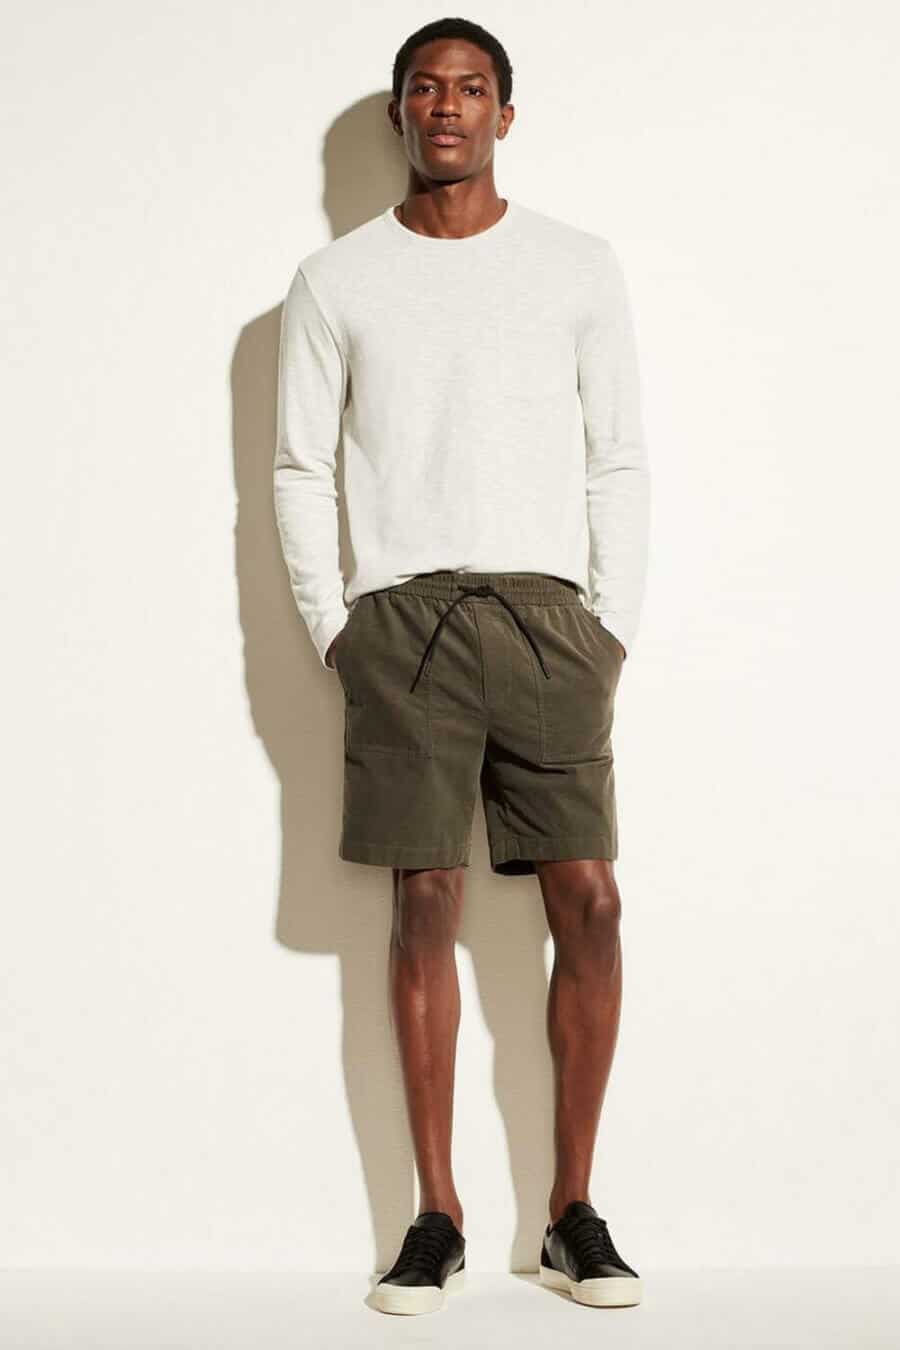 Men's summer outfit: drawstrong shorts, long white top and sneakers